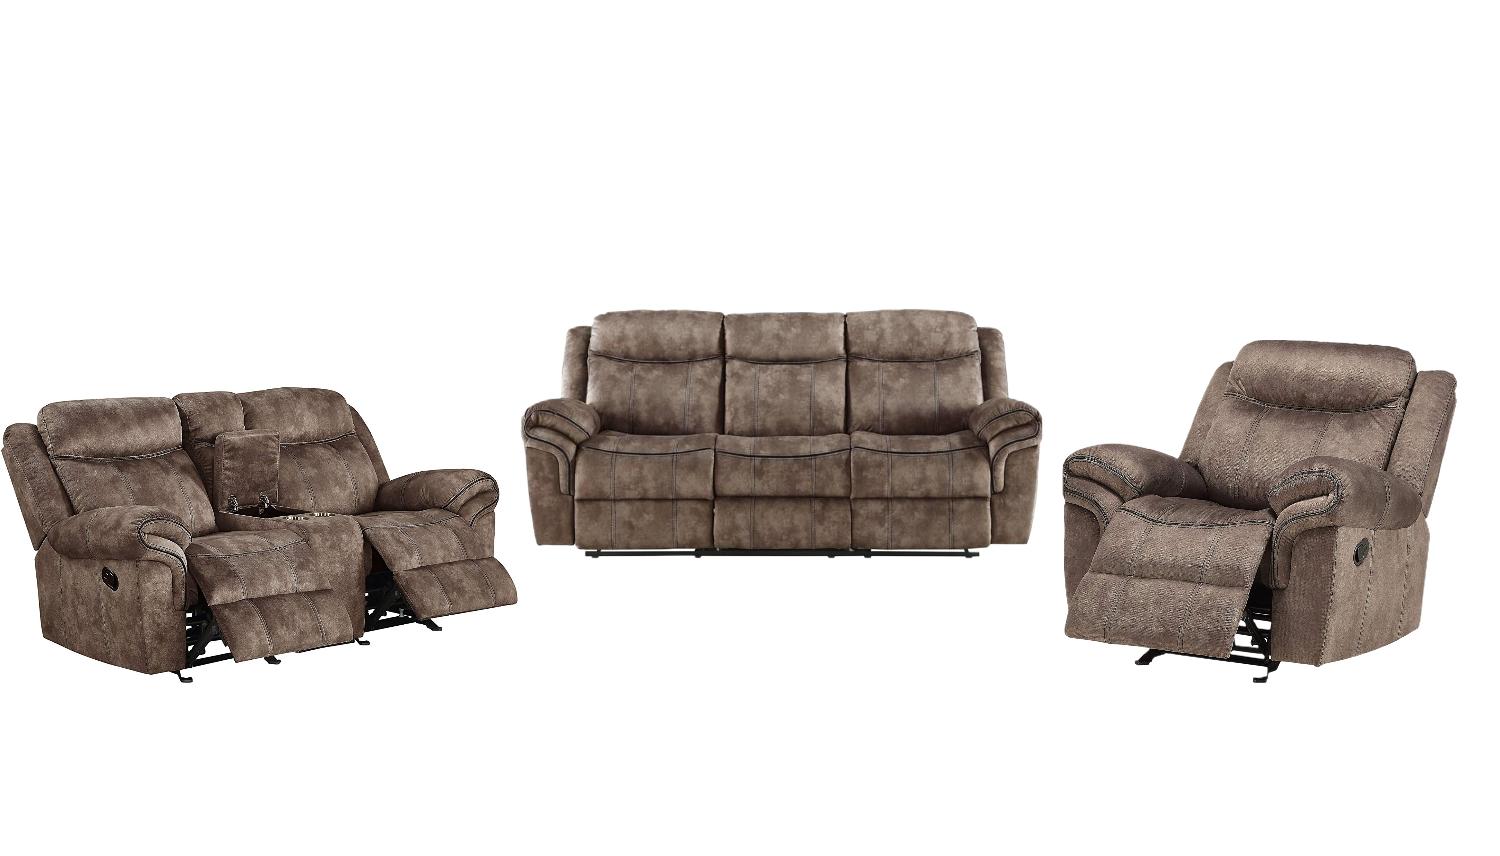 Contemporary Sofa Loveseat and Chair Zubaida 55020-3pcs in Chocolate 